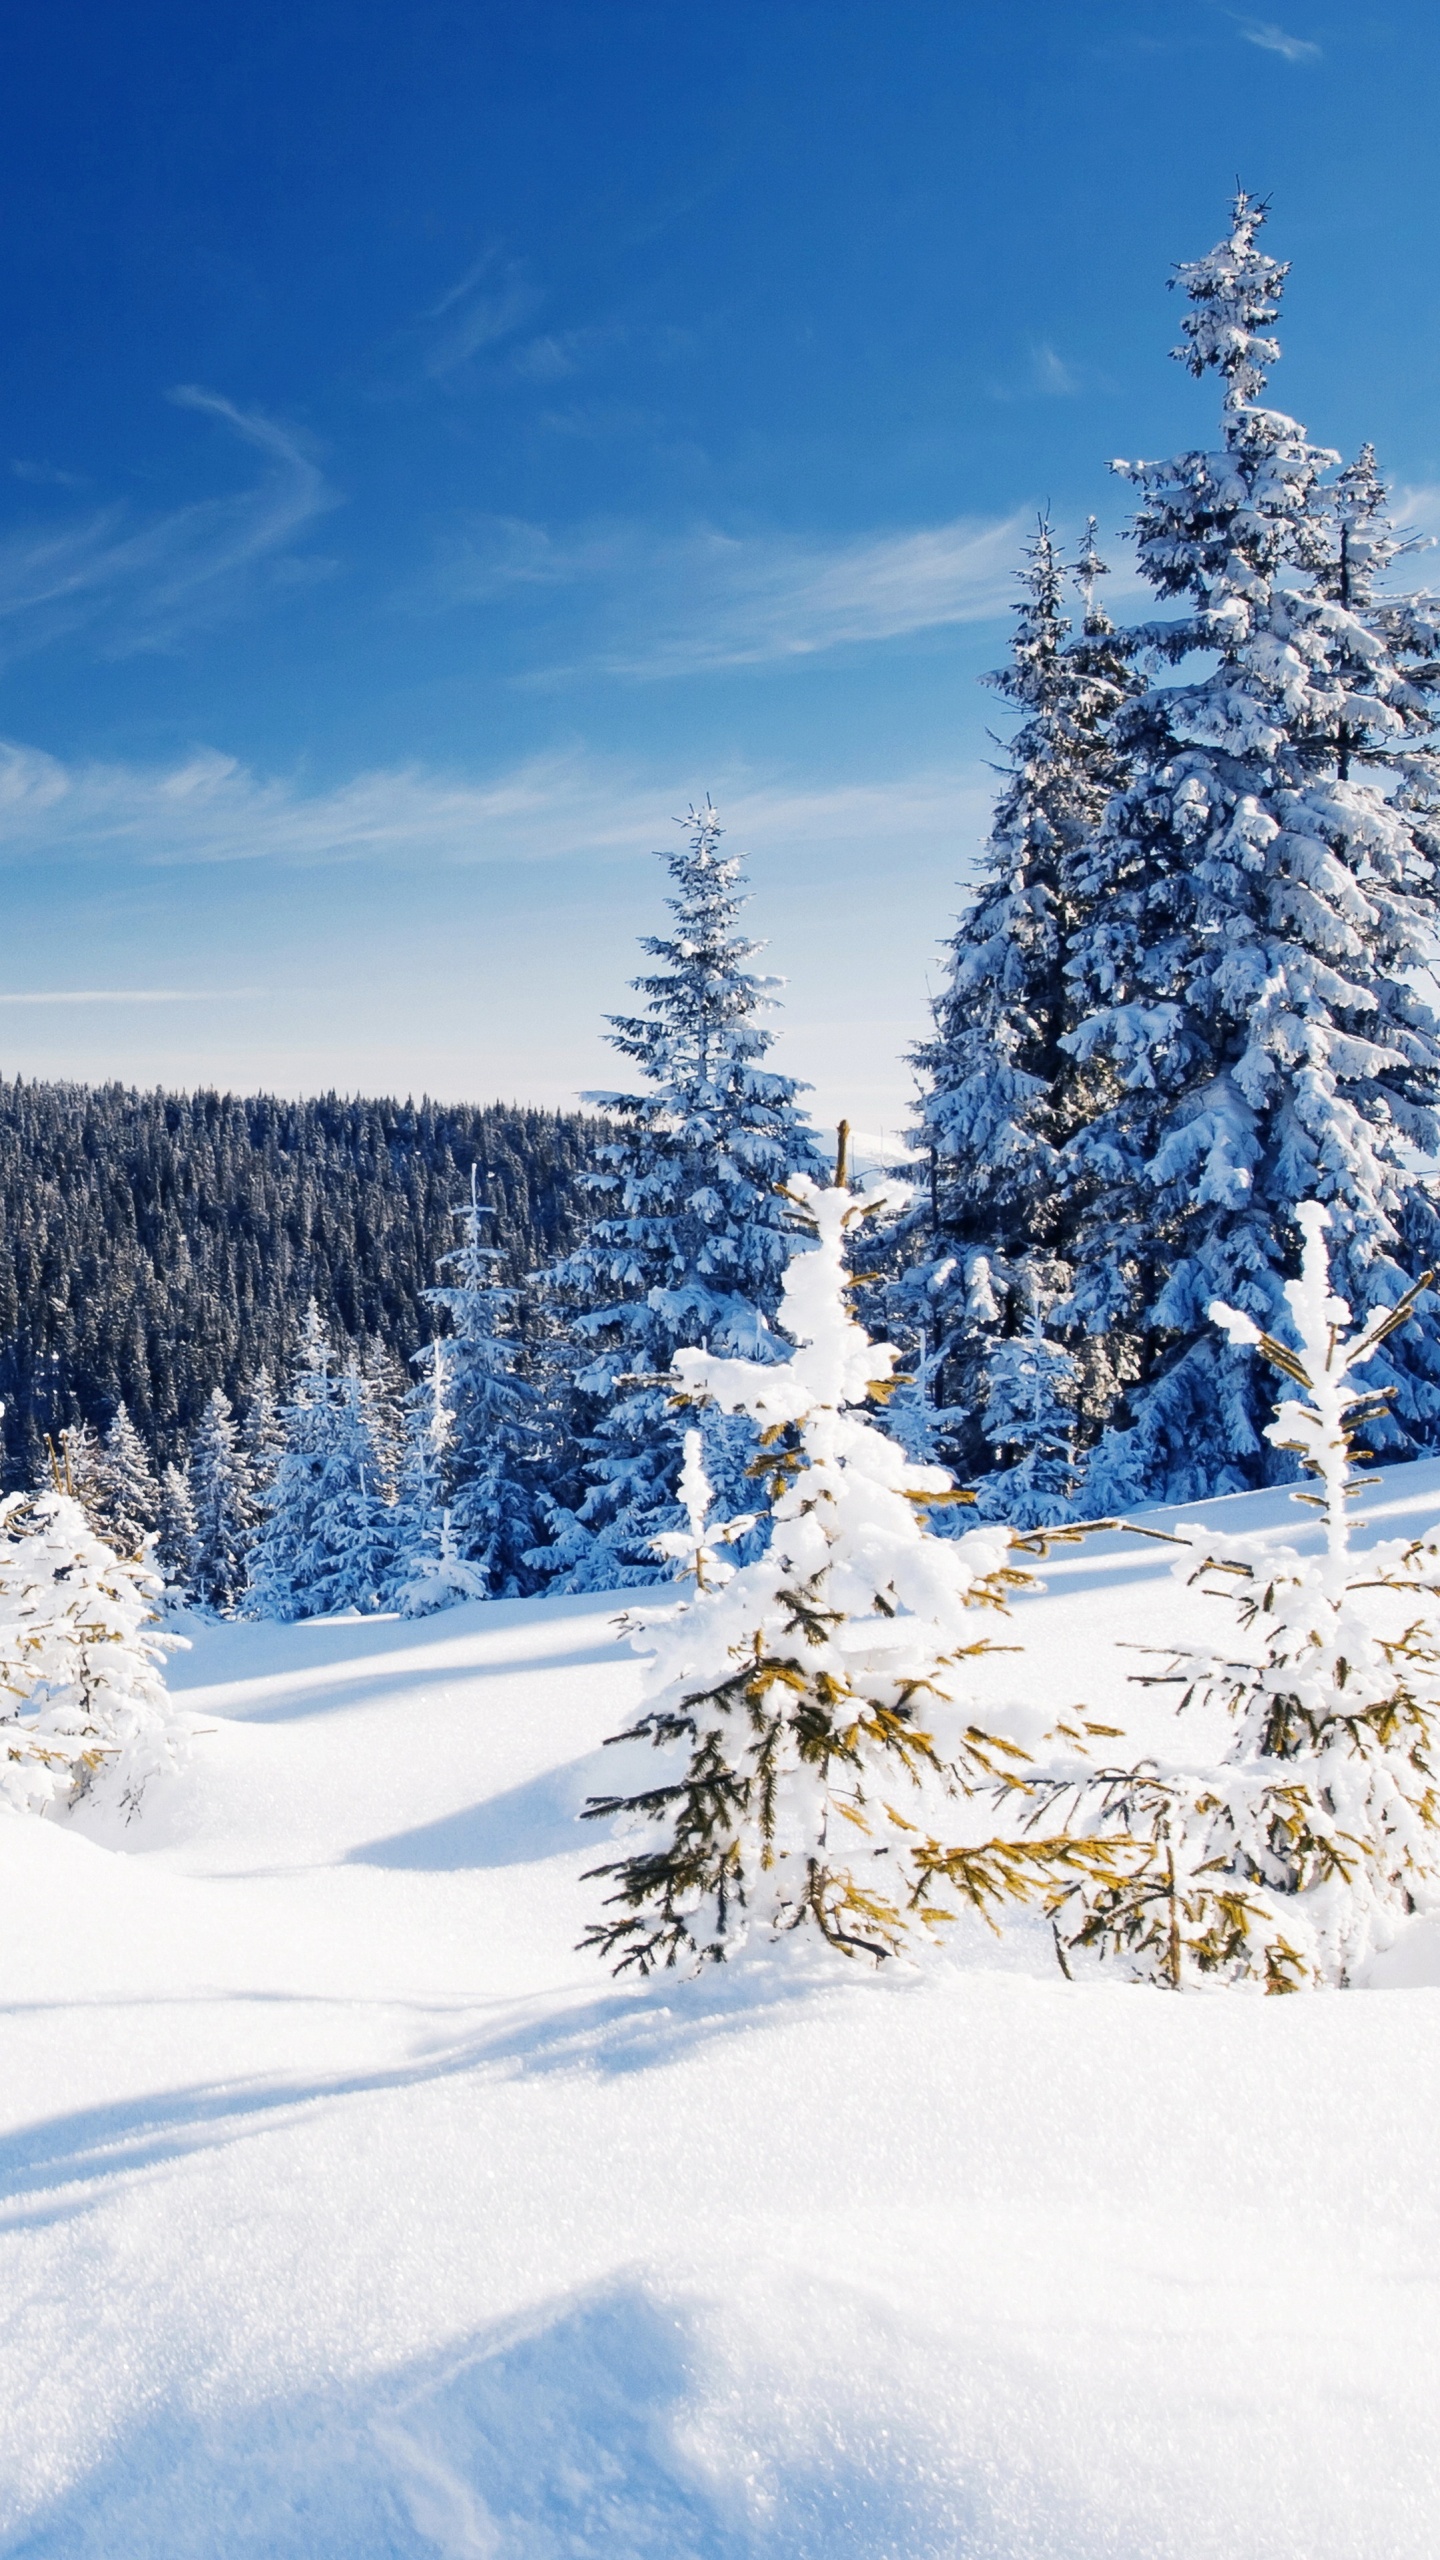 Snow Covered Trees Under Blue Sky During Daytime. Wallpaper in 1440x2560 Resolution